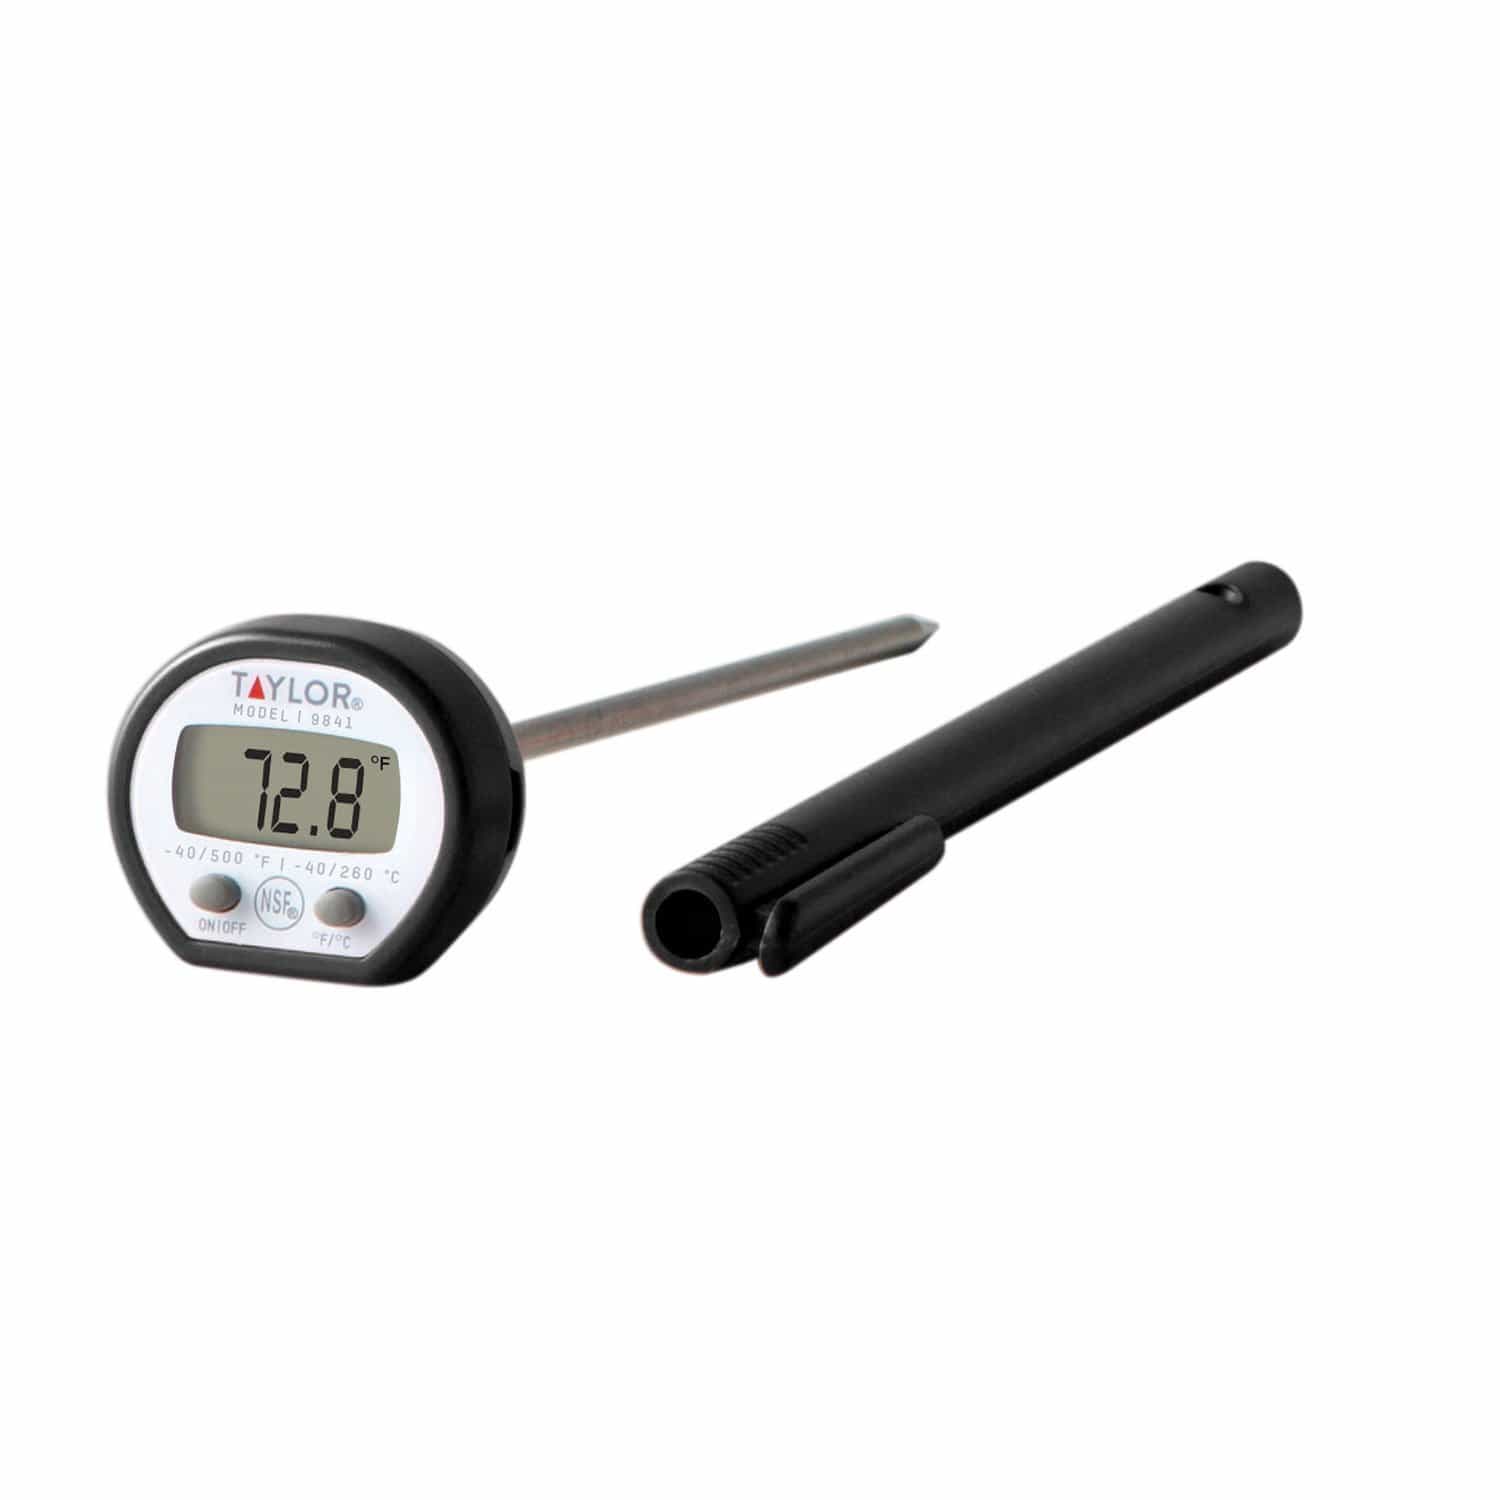 Taylor Tube Thermometer Plastic White 4 in.